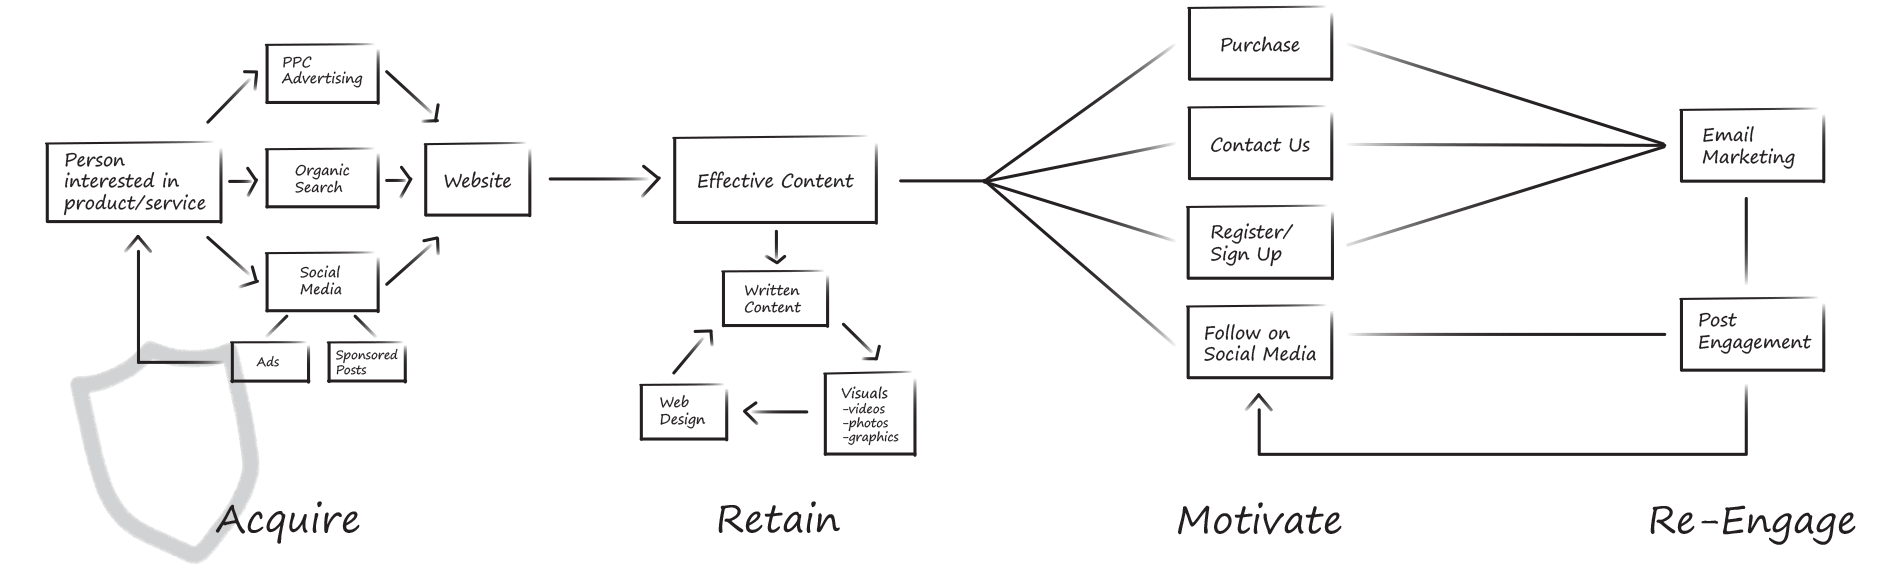 Flowchart for Acquire, Retain, Motivate, and Re-Engage